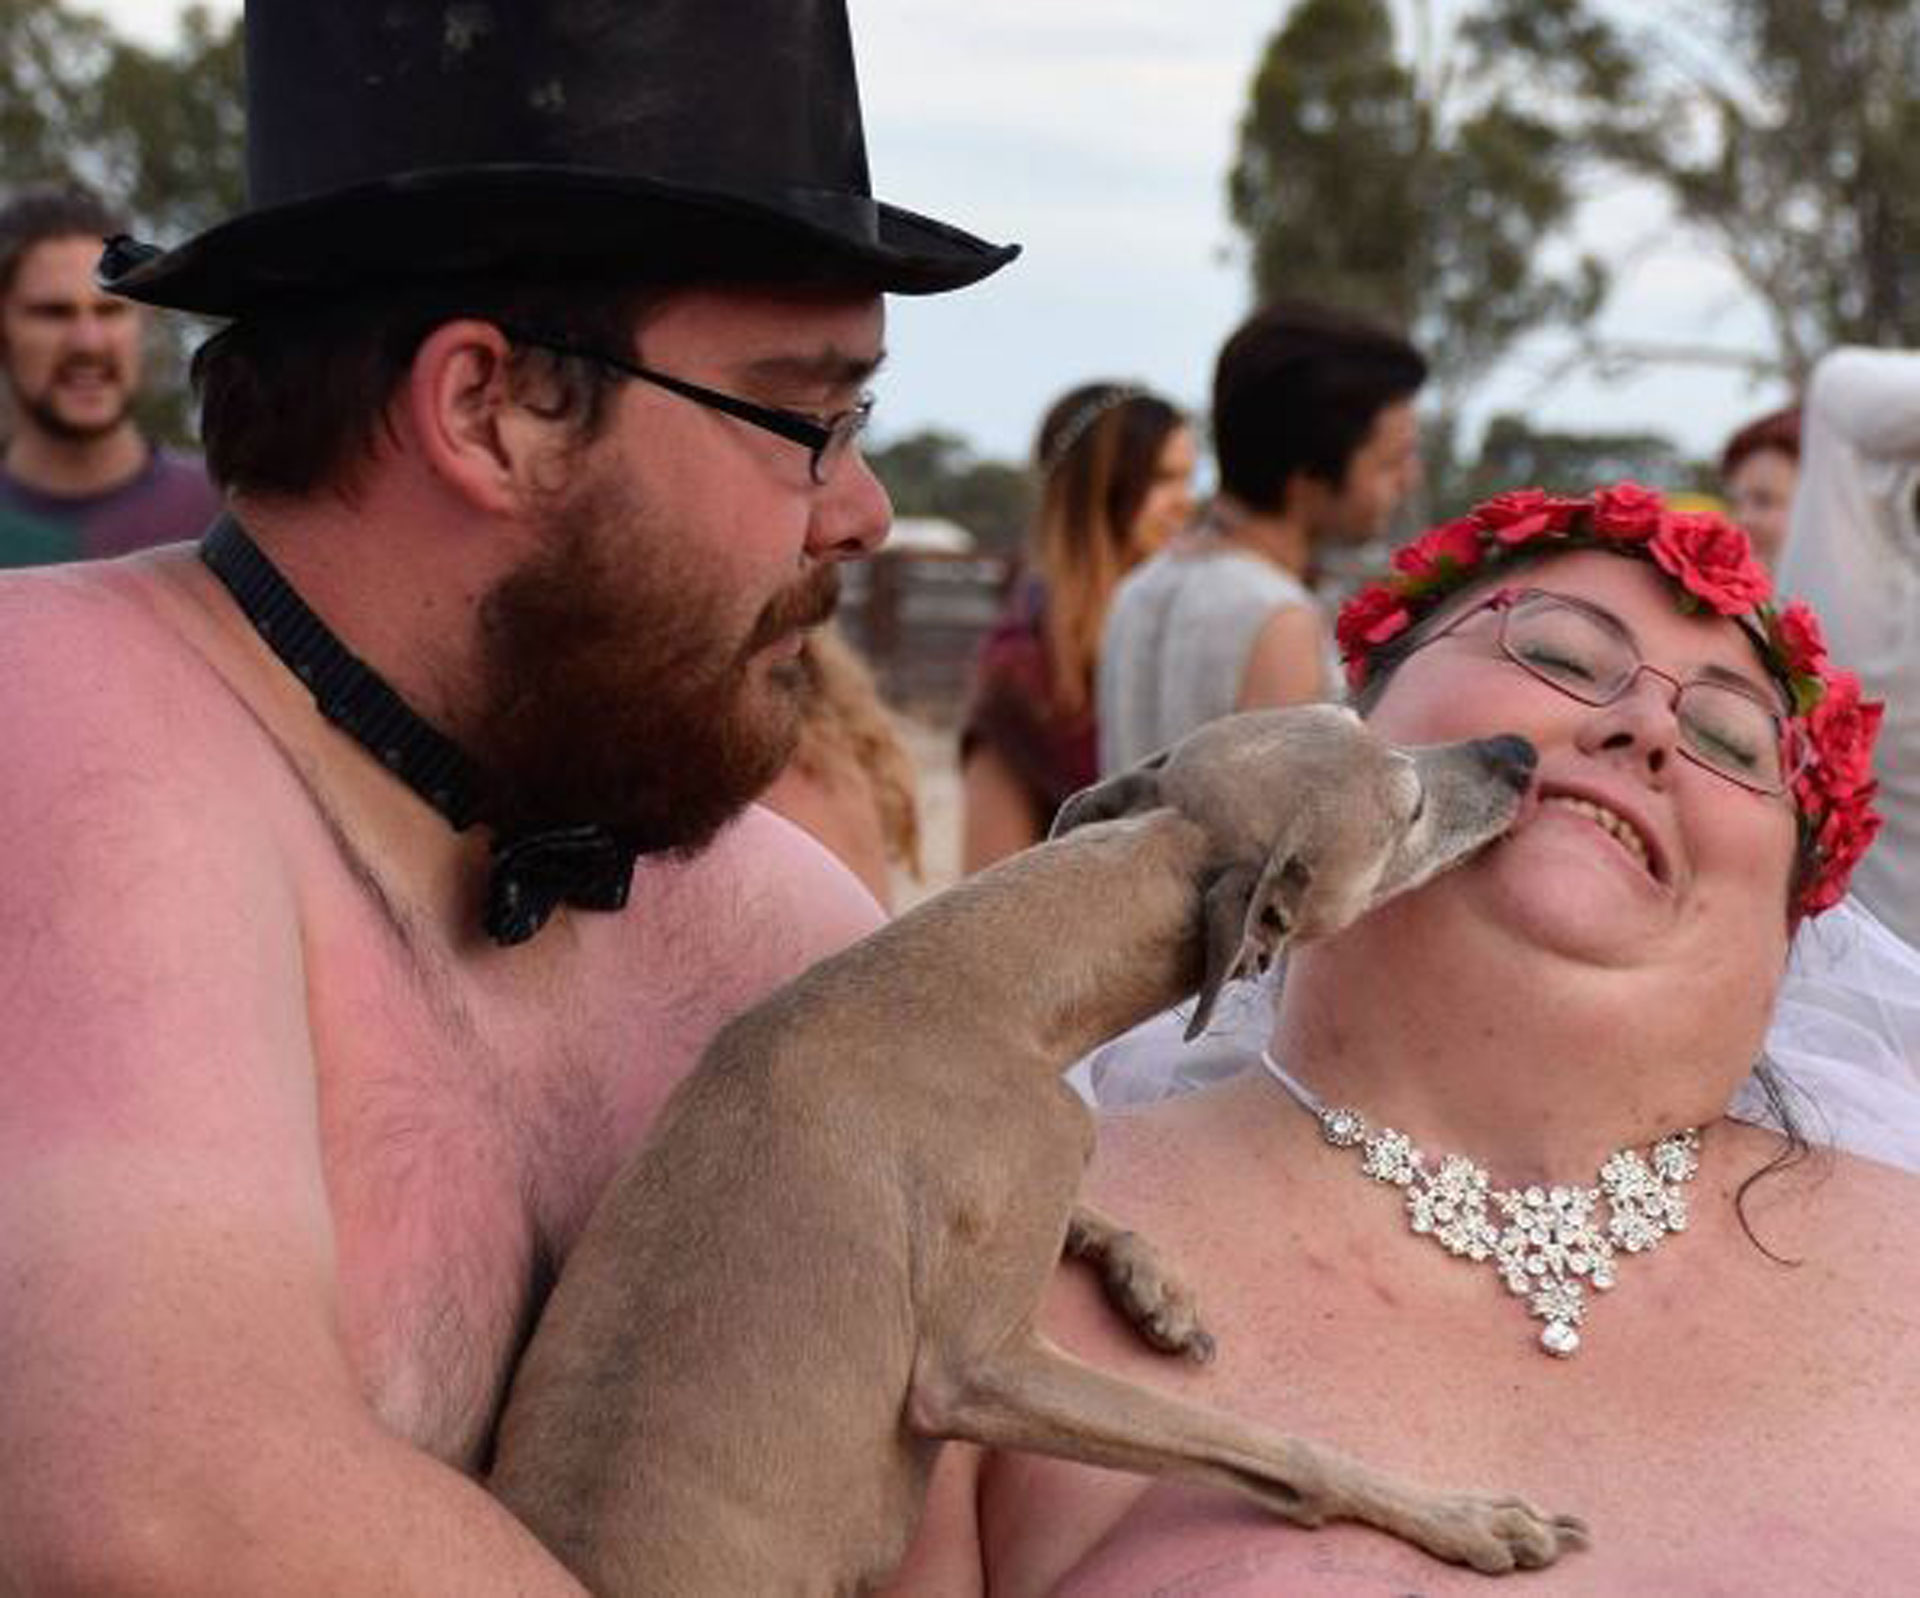 Aussie woman wakes from coma, gets married in the nude